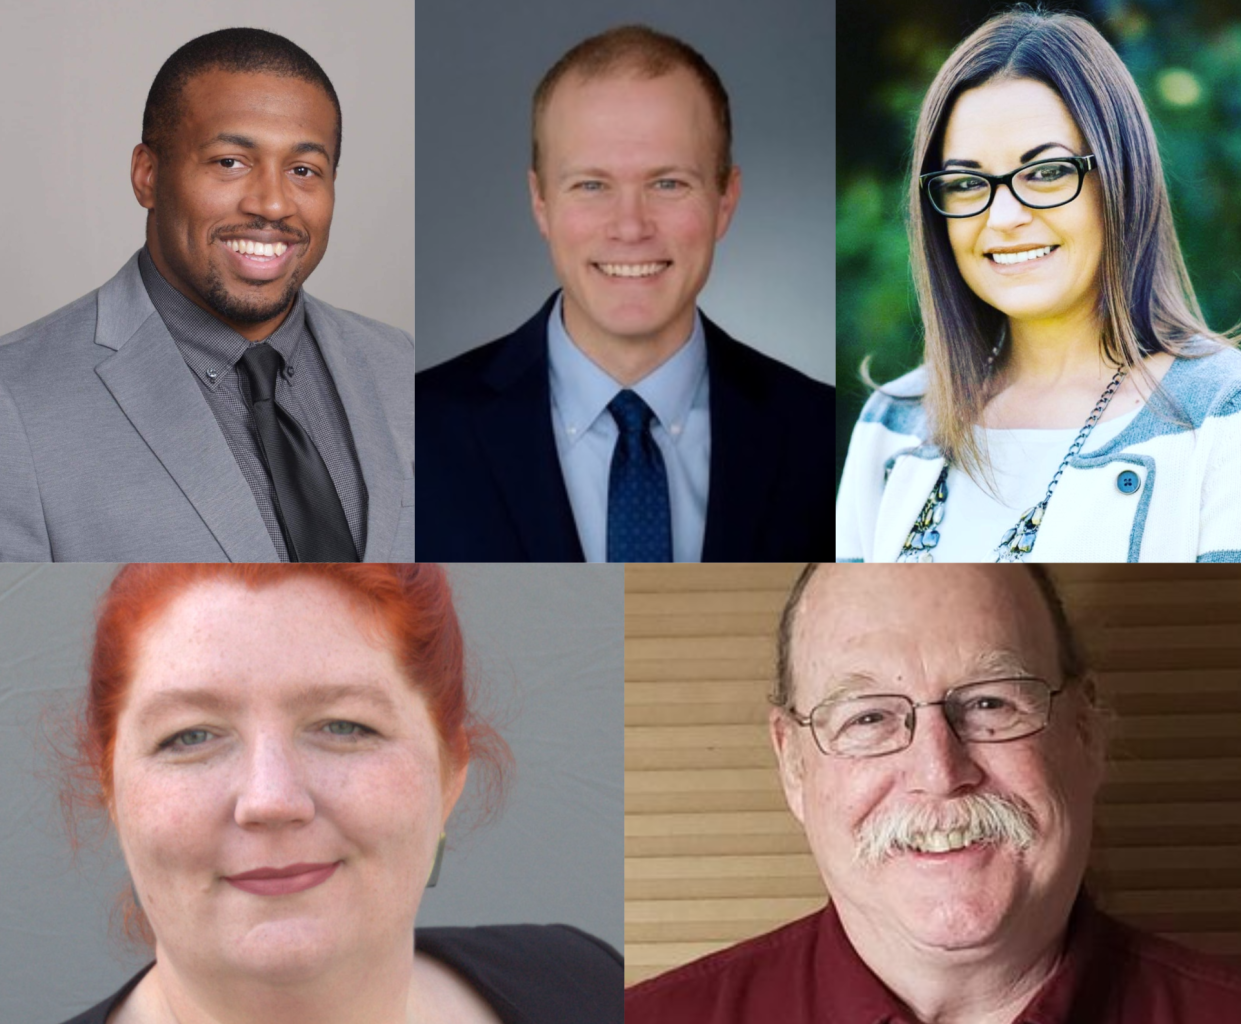 Seven candidates are vying for the three open positions on the Bethel School District Board of Directors in the May 2023 special election.